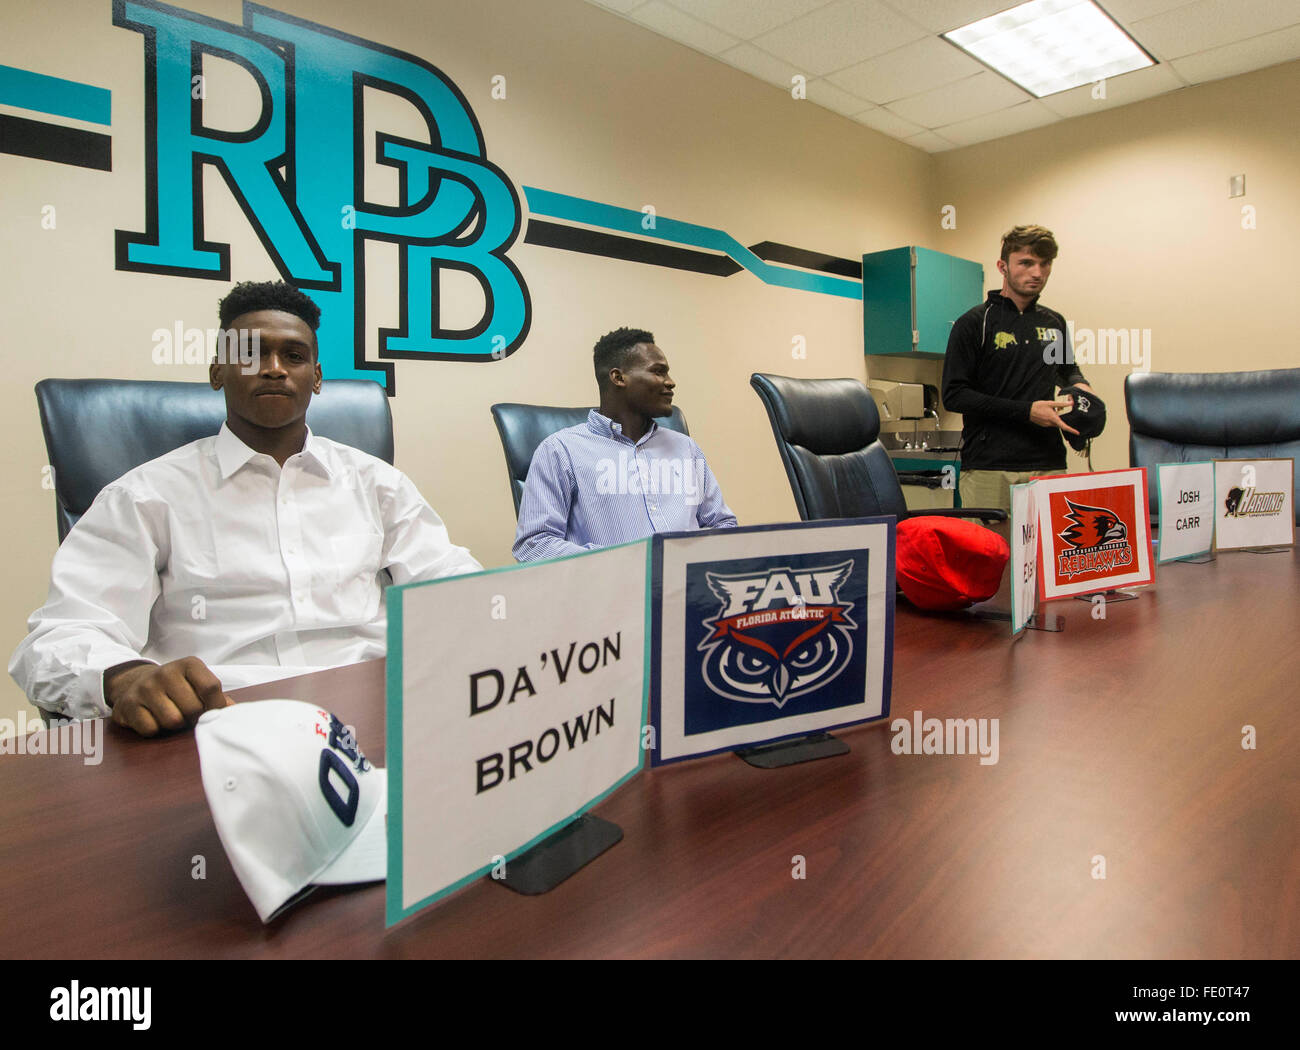 Royal Palm Beach, Florida, USA. 3rd Feb, 2016. Da'Von Brown (L), Marlon Eugene,(C), and Josh Carr, (R), before the start of Signing Day at Royal Palm Beach High School February 03, 2016 in Royal Palm Beach. Brown a defensive back signed with Florida Atlantic University, Eugene, a linebacker signed with Southeast Missouri State University, and Carr, a quarterback signed with Harding University. © Bill Ingram/The Palm Beach Post/ZUMA Wire/Alamy Live News Stock Photo